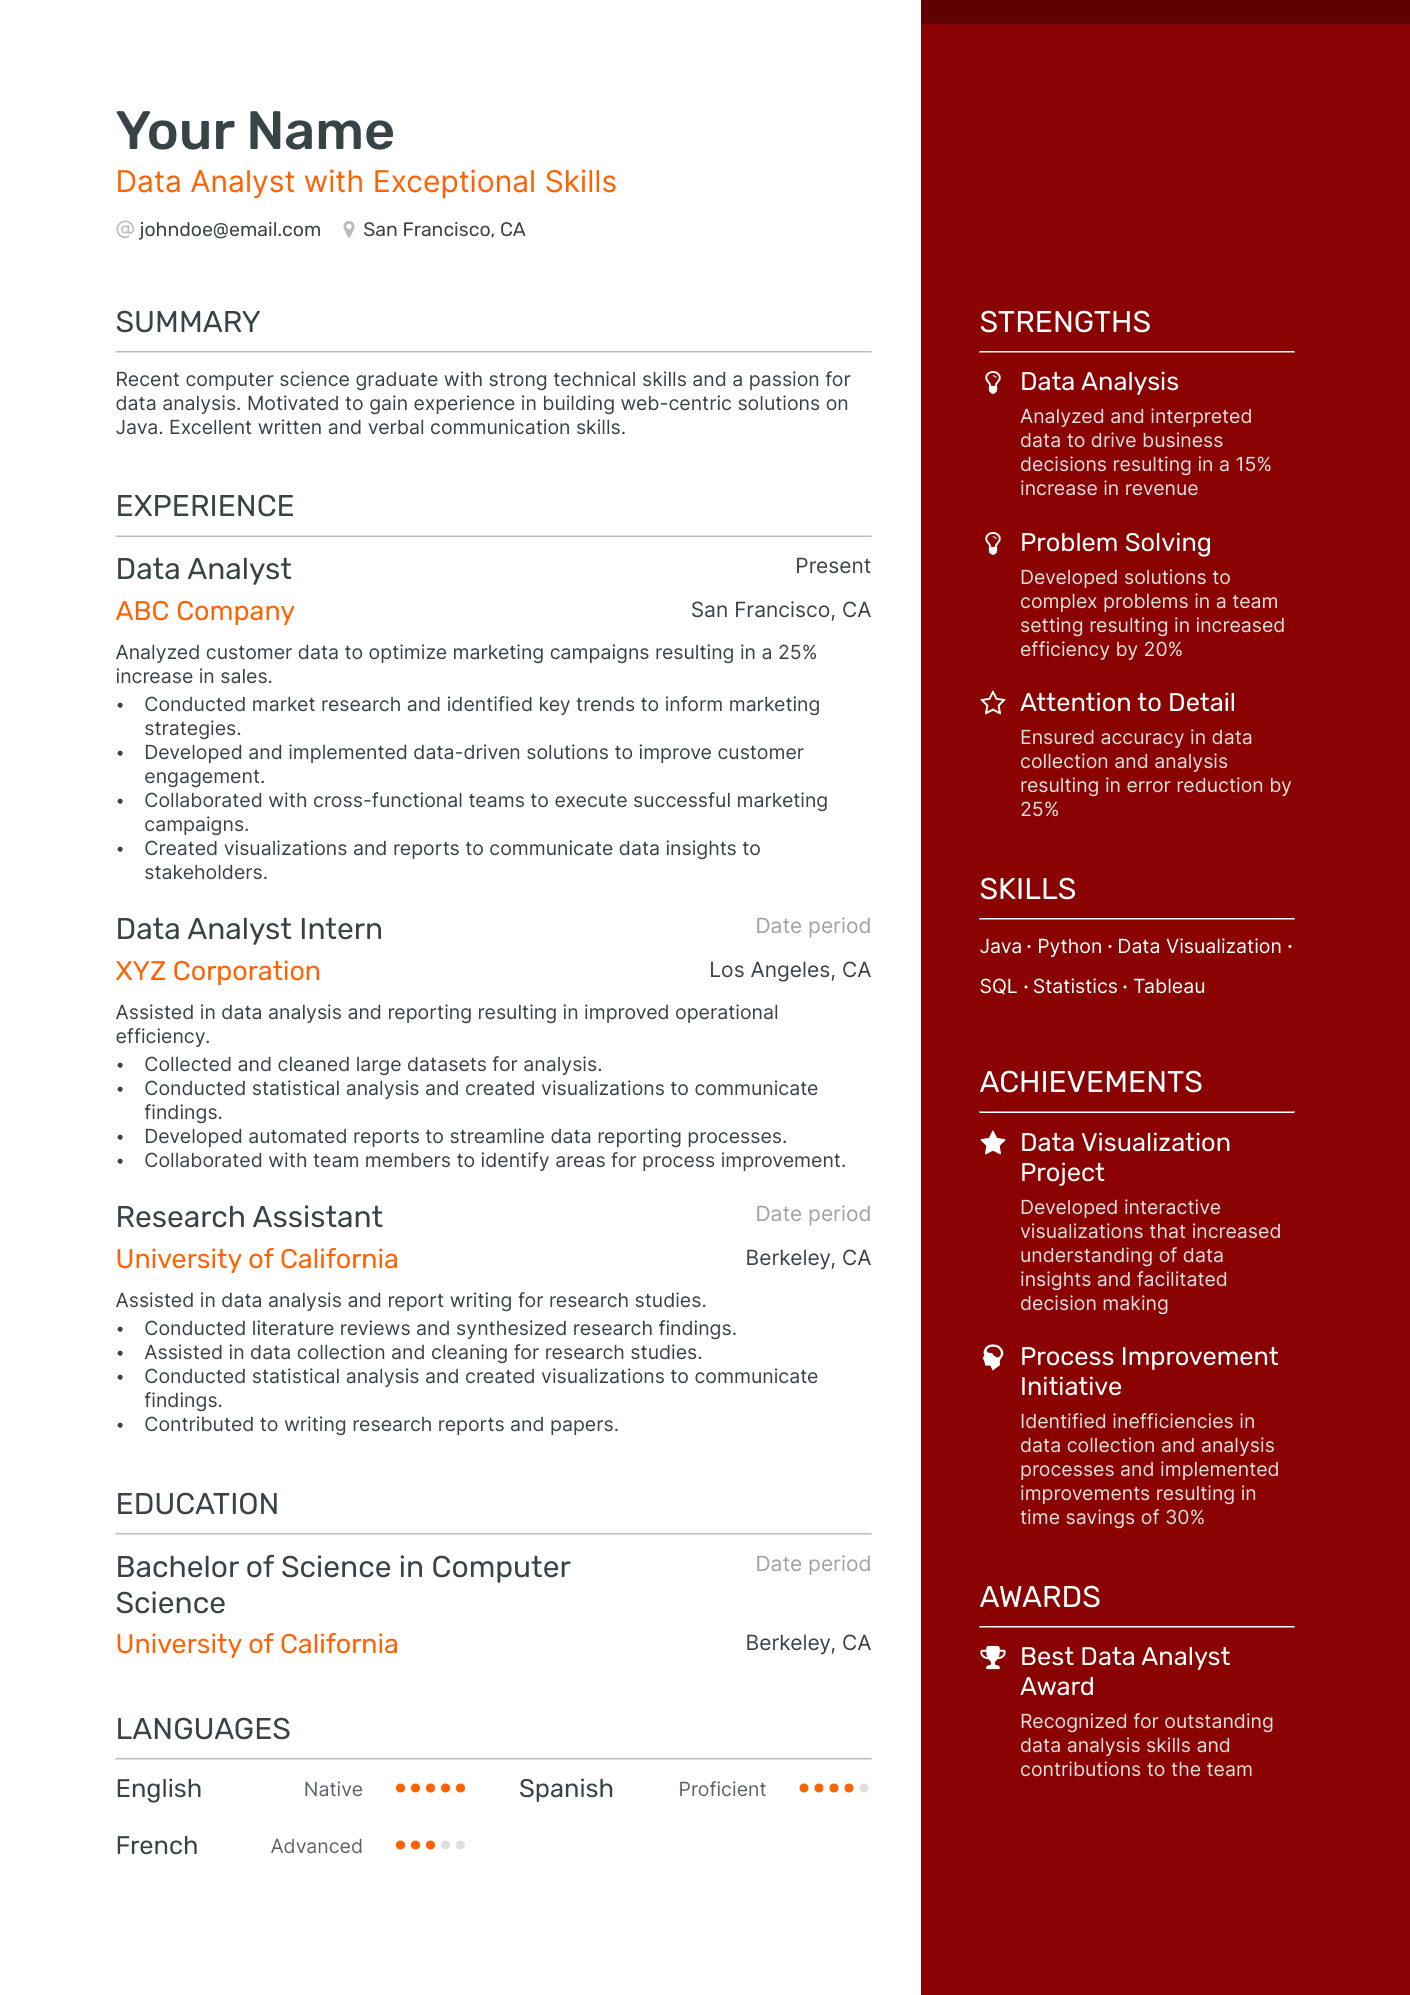 Data Analyst with Exceptional Skills resume example